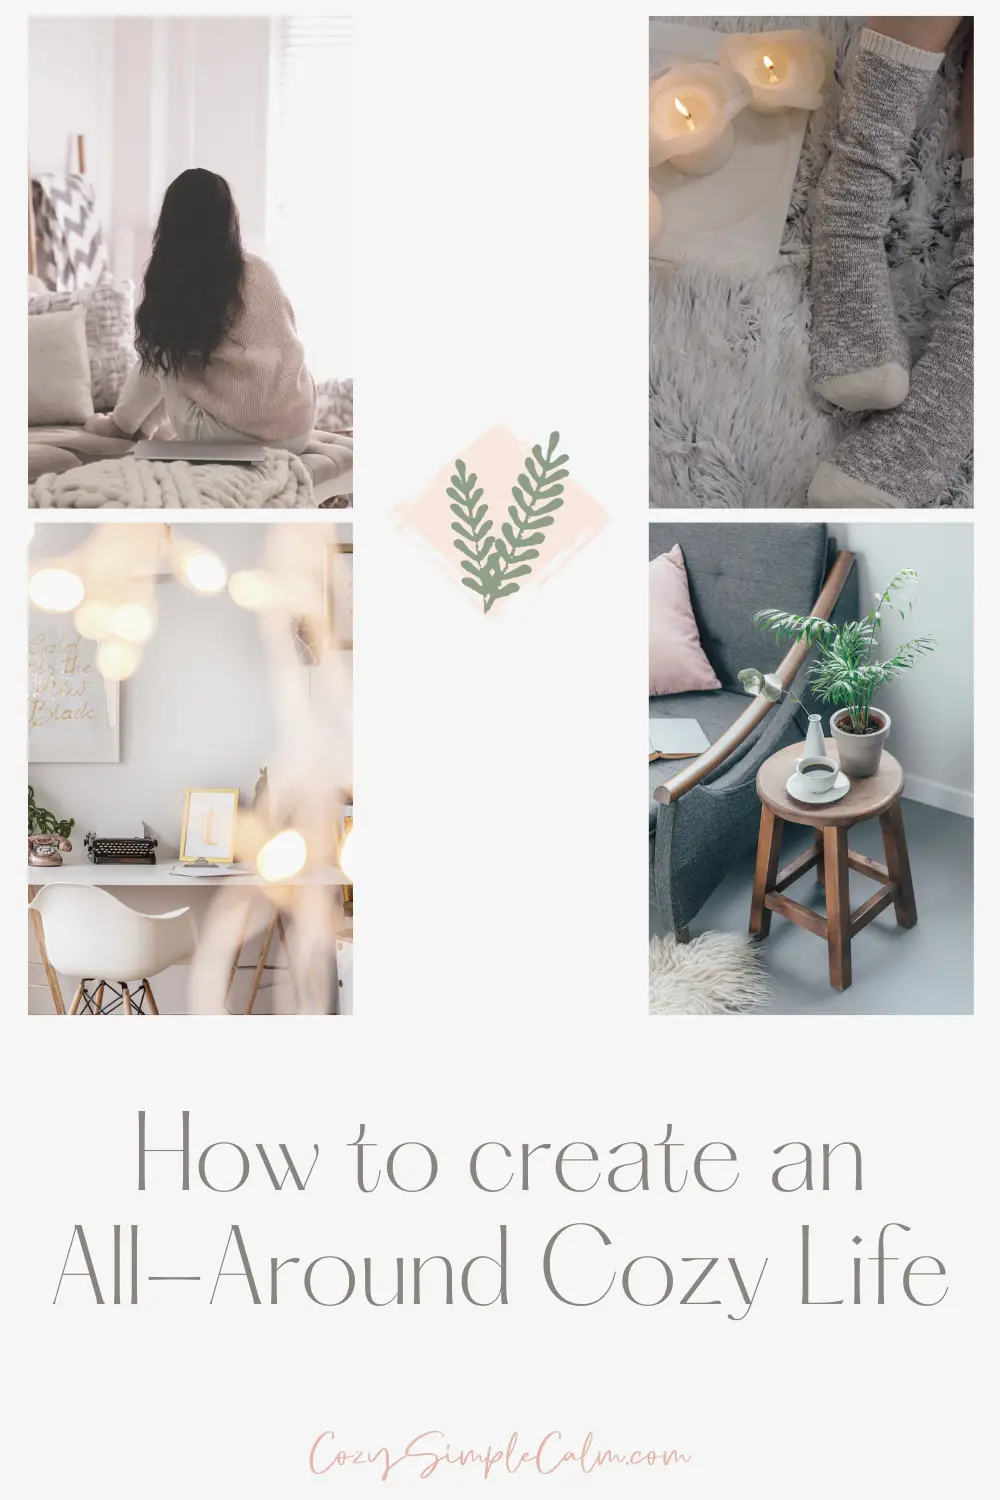 Collection of images including girl sitting on bed, socks & candles, organized desk with fairy lights, and end table with houseplant - Text overlay: How to create an all-around cozy life